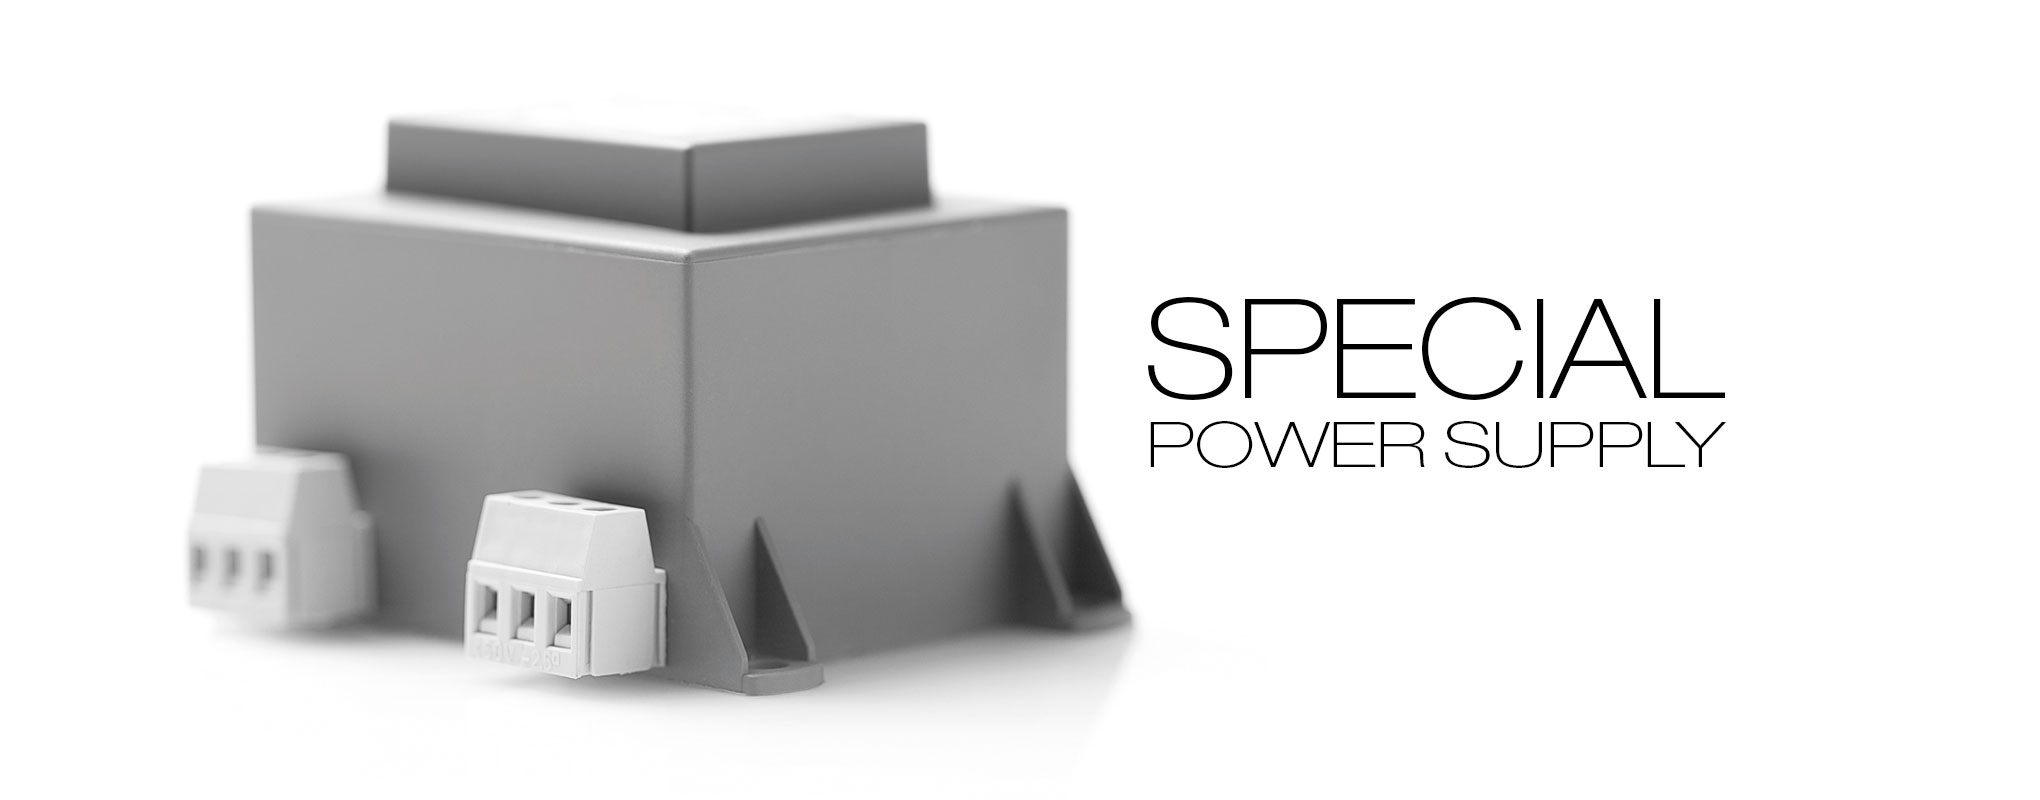 Special power supplies